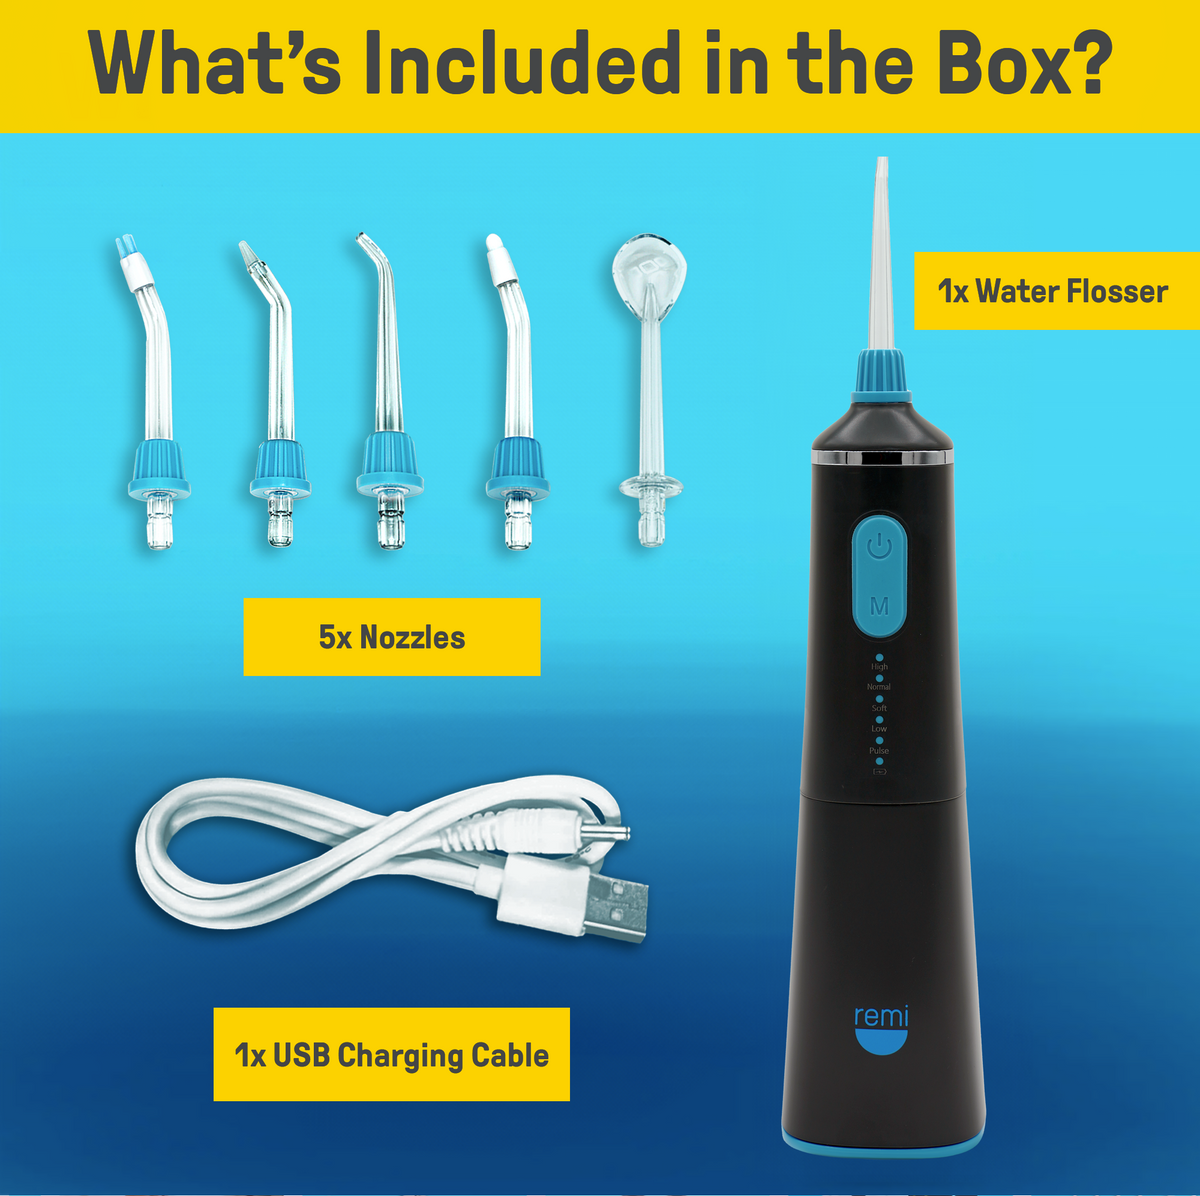 Contents of a Waterpik Cordless Water Flosser package including 1 water flosser, 5 nozzles, and 1 USB charging cable.